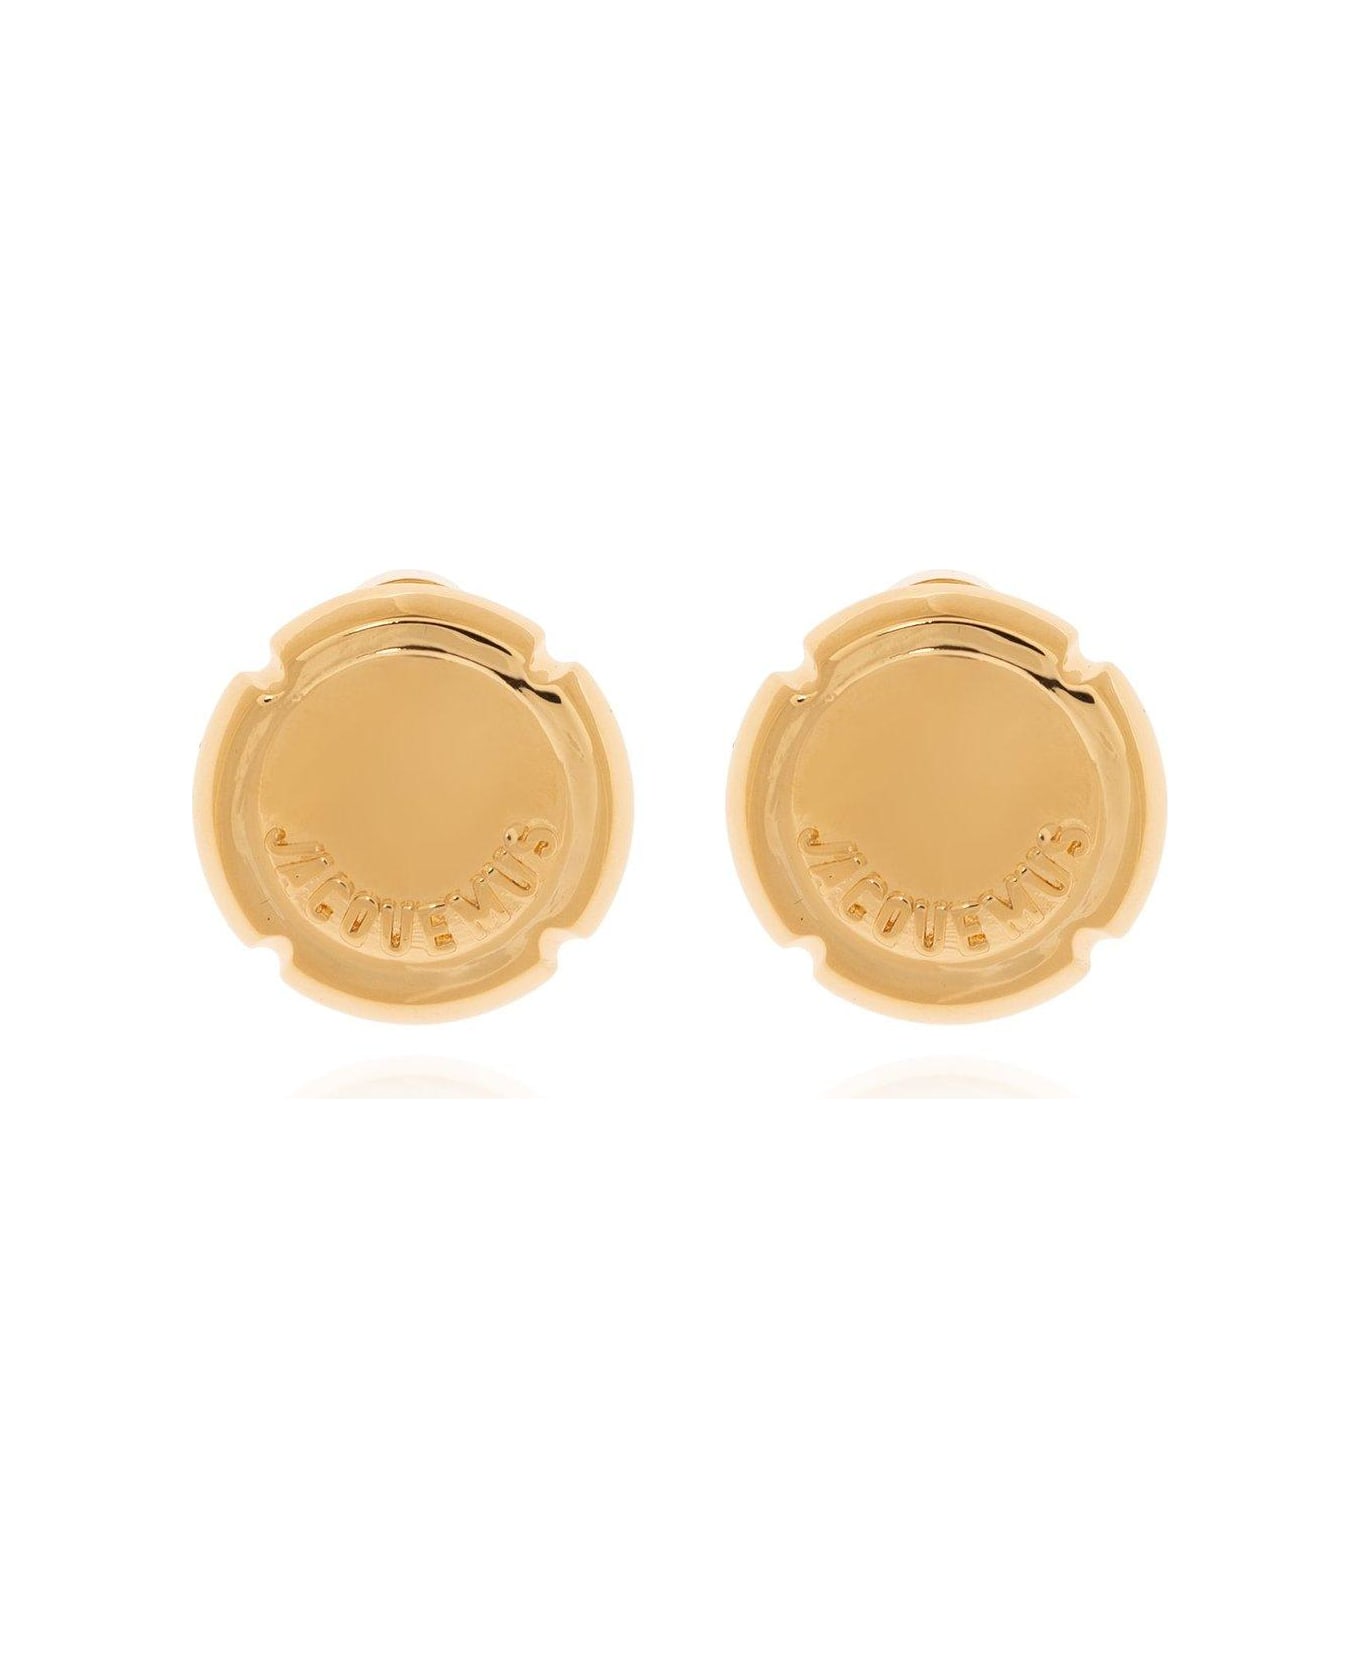 Jacquemus Champagne Muselet Earrings - Light Gold イヤリング